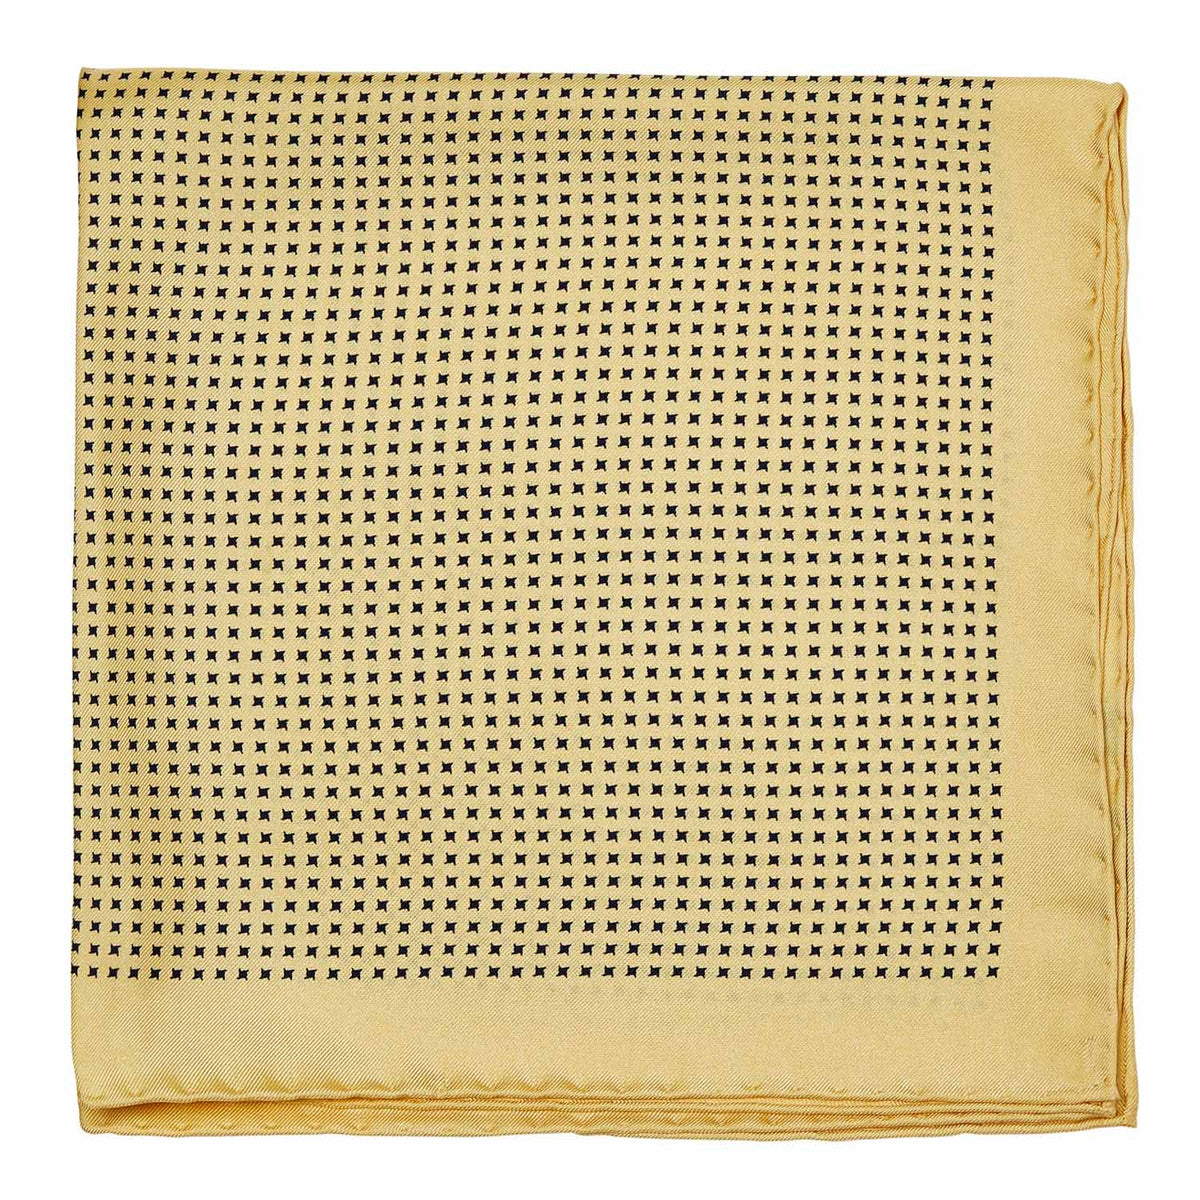 A Sovereign Grade 100% Silk Yellow Repeating Star Pocket Square with hand-rolled edges by KirbyAllison.com.